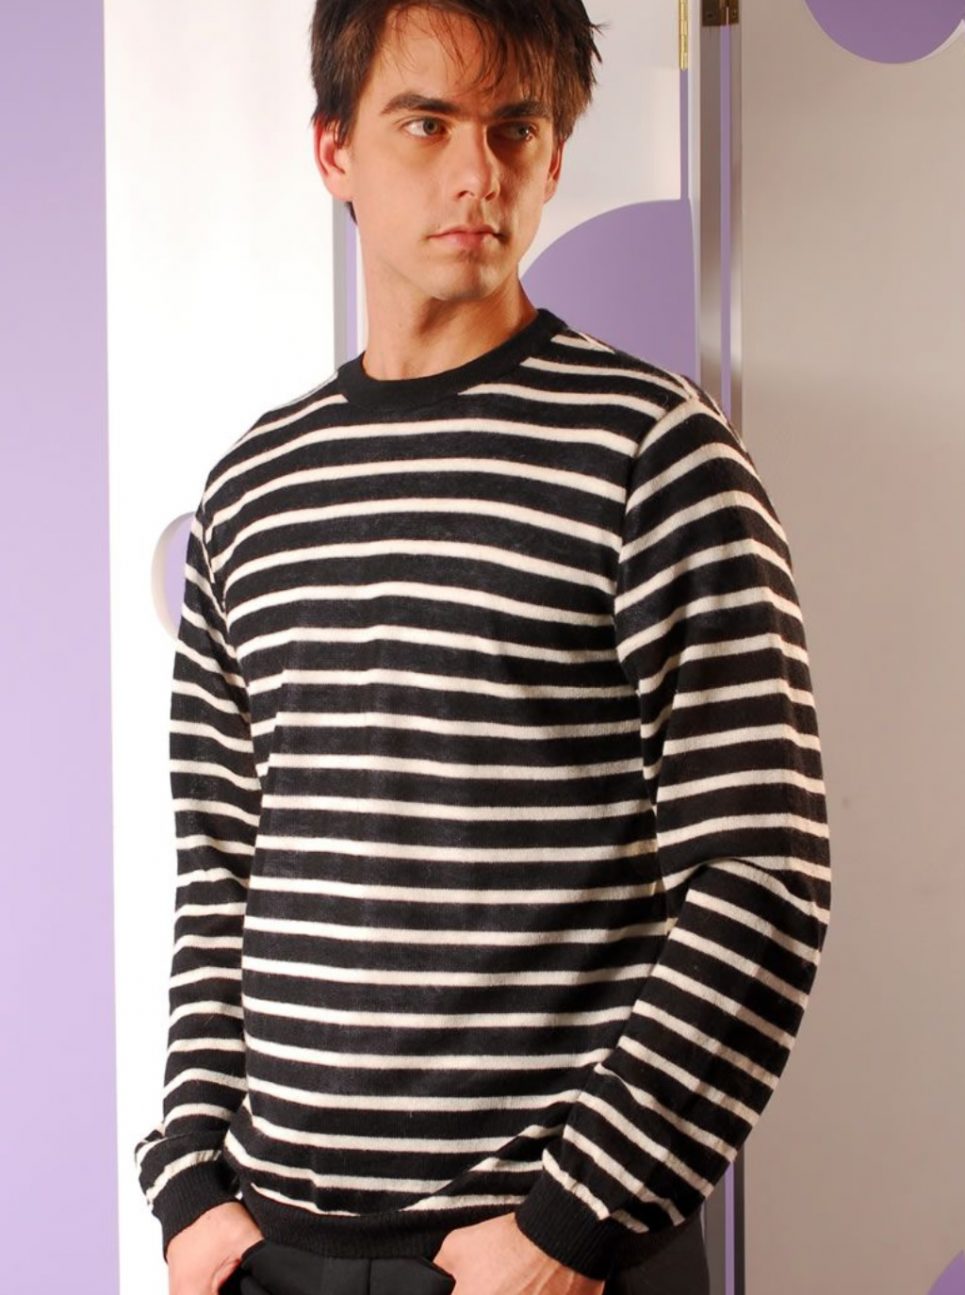 Light Stripped Sweater for Men with a Crew Neck